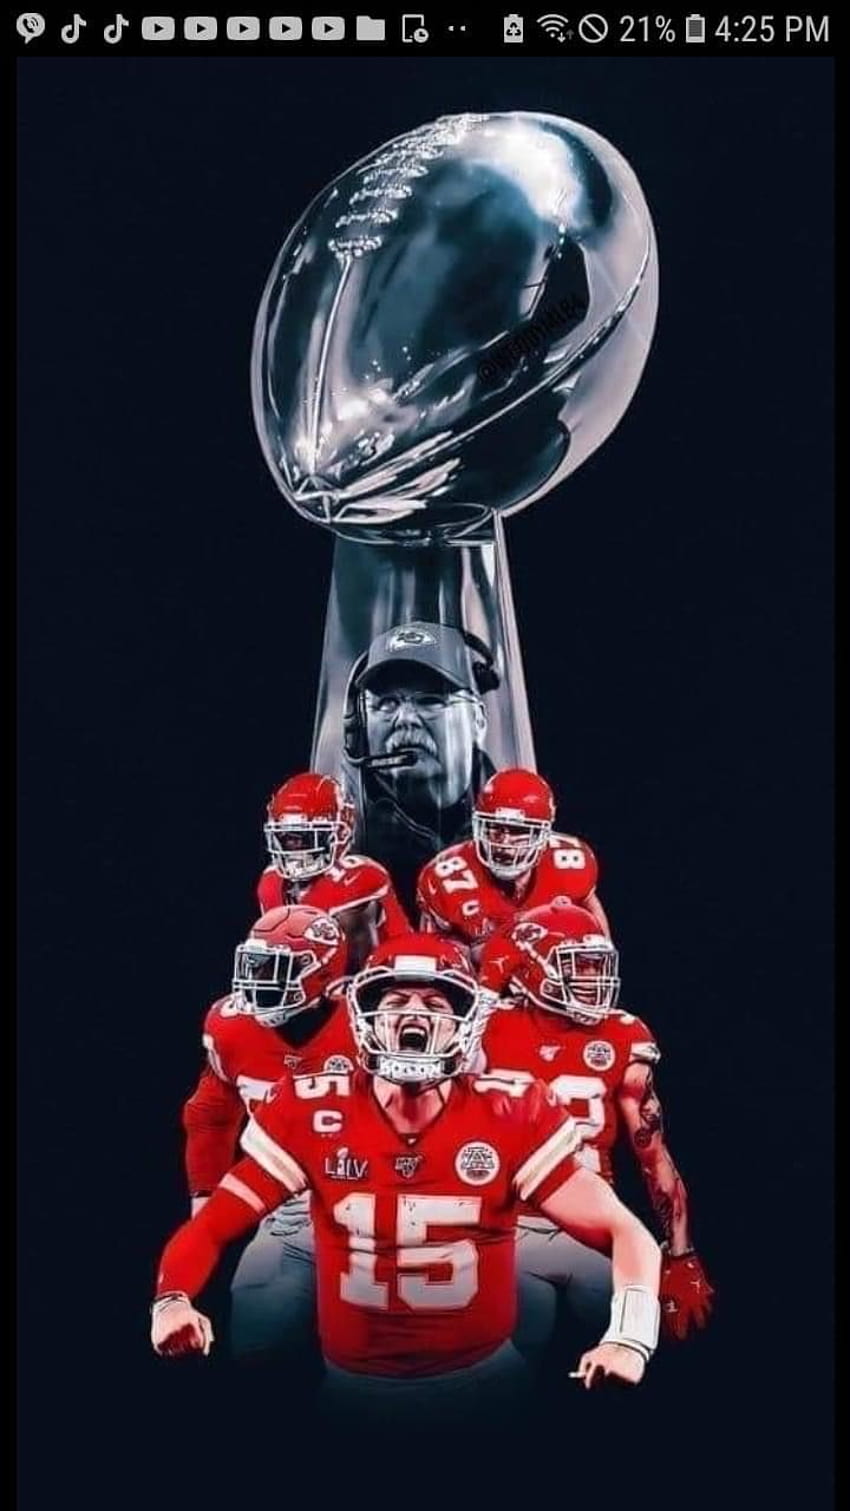 Got this as my current iPhone wallpaperanyone gothaveseen this same  shot only with Brady in Buck colors and Frank in the home colors TIAGO  CHIEFS  rKansasCityChiefs